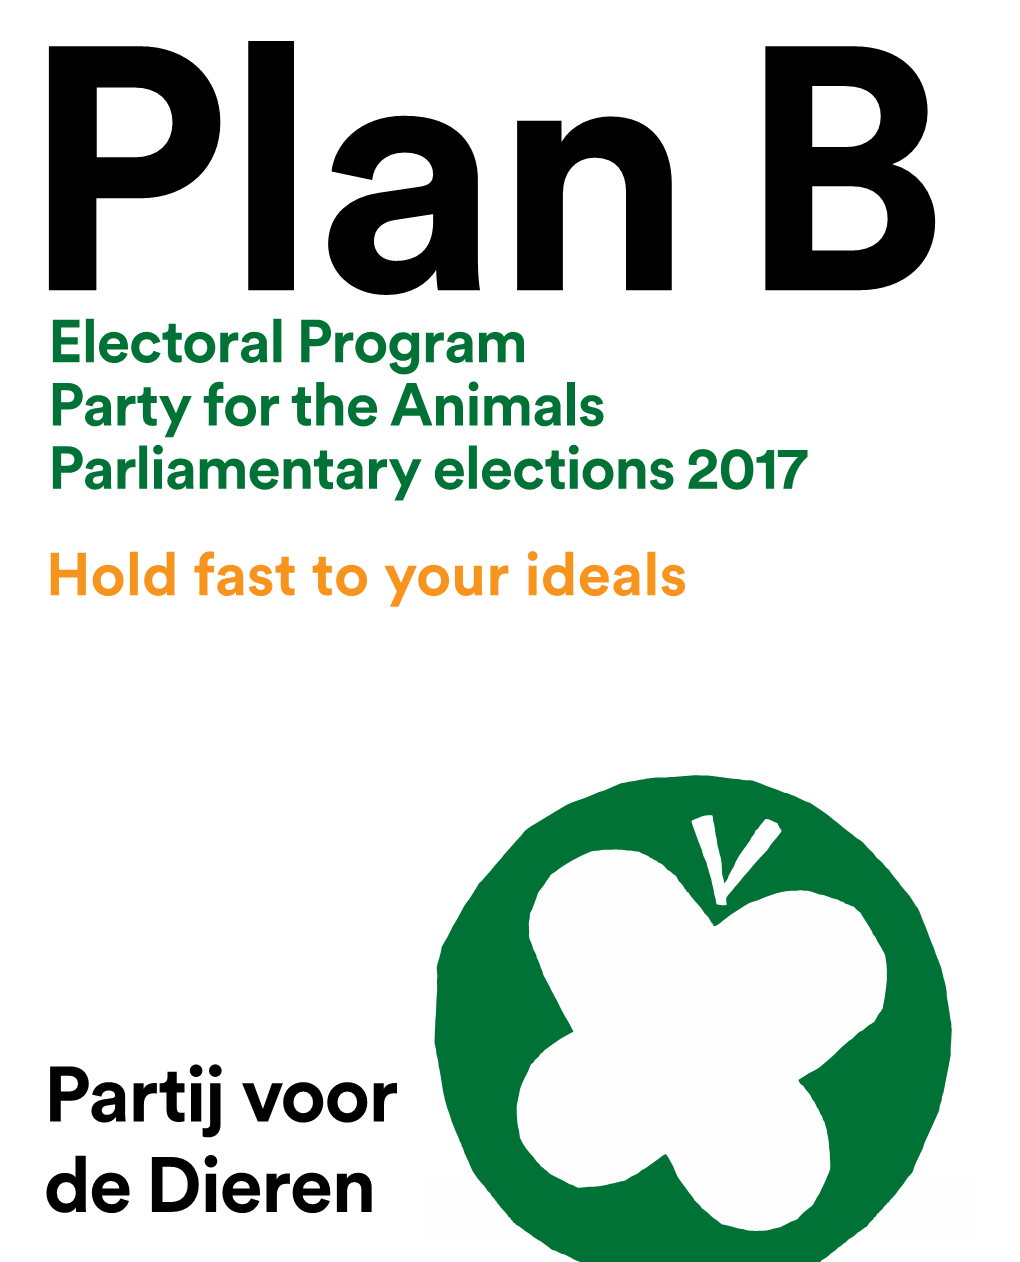 Electoral Program Party for the Animals Parliamentary Elections 2017 Electoral Program Party for the Animals Parliamentary Elections 2017 | 1 Introduction – Plan B